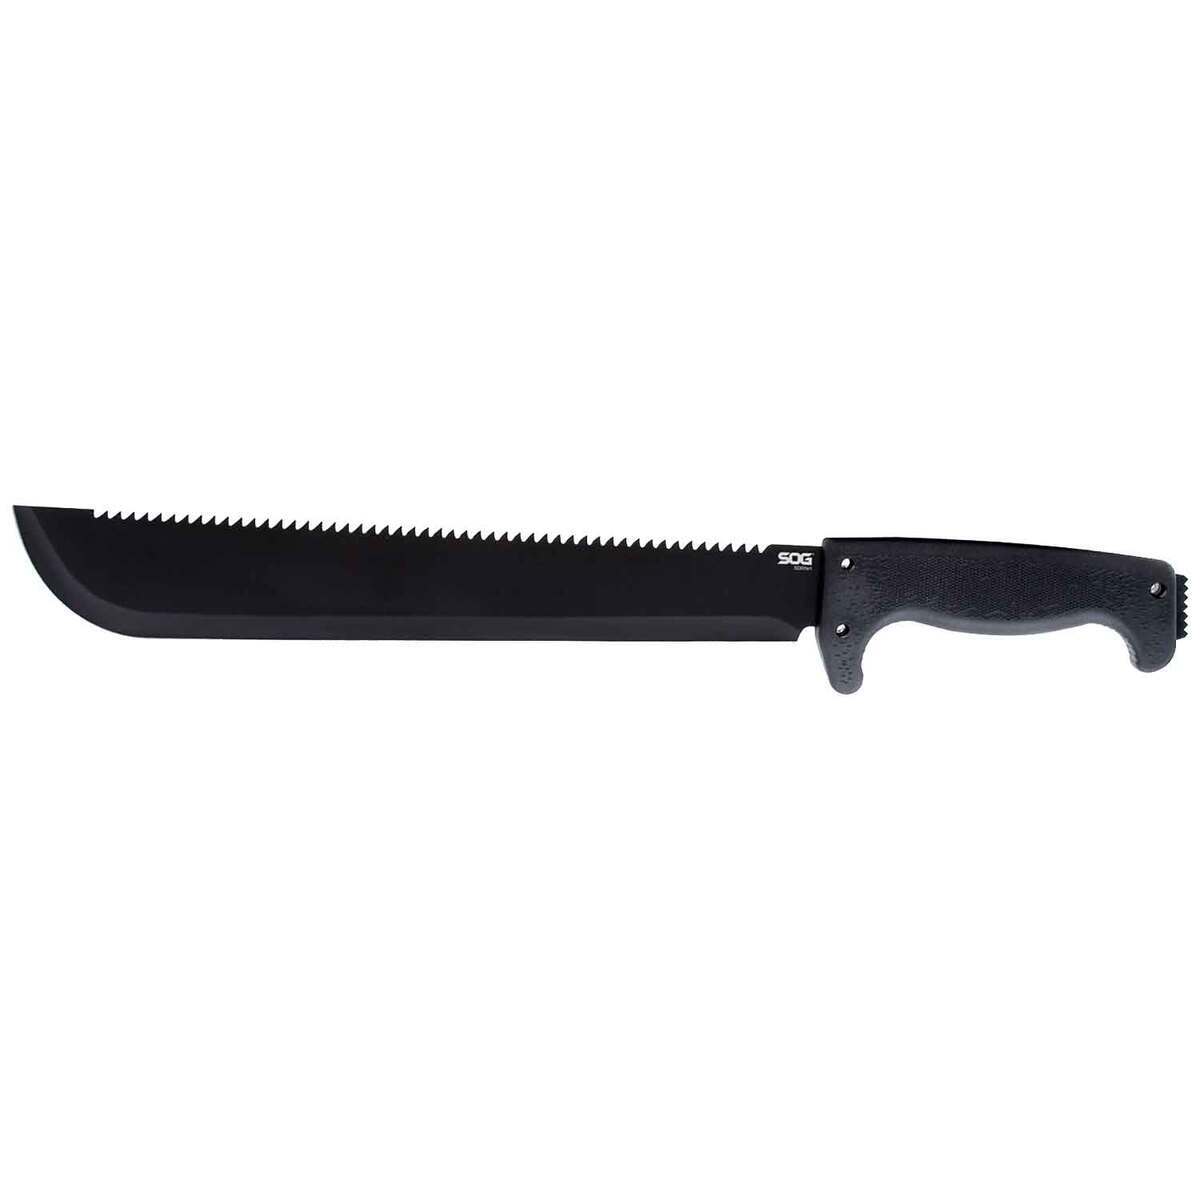 White River Small Game 2.62 inch Fixed Blade Knife